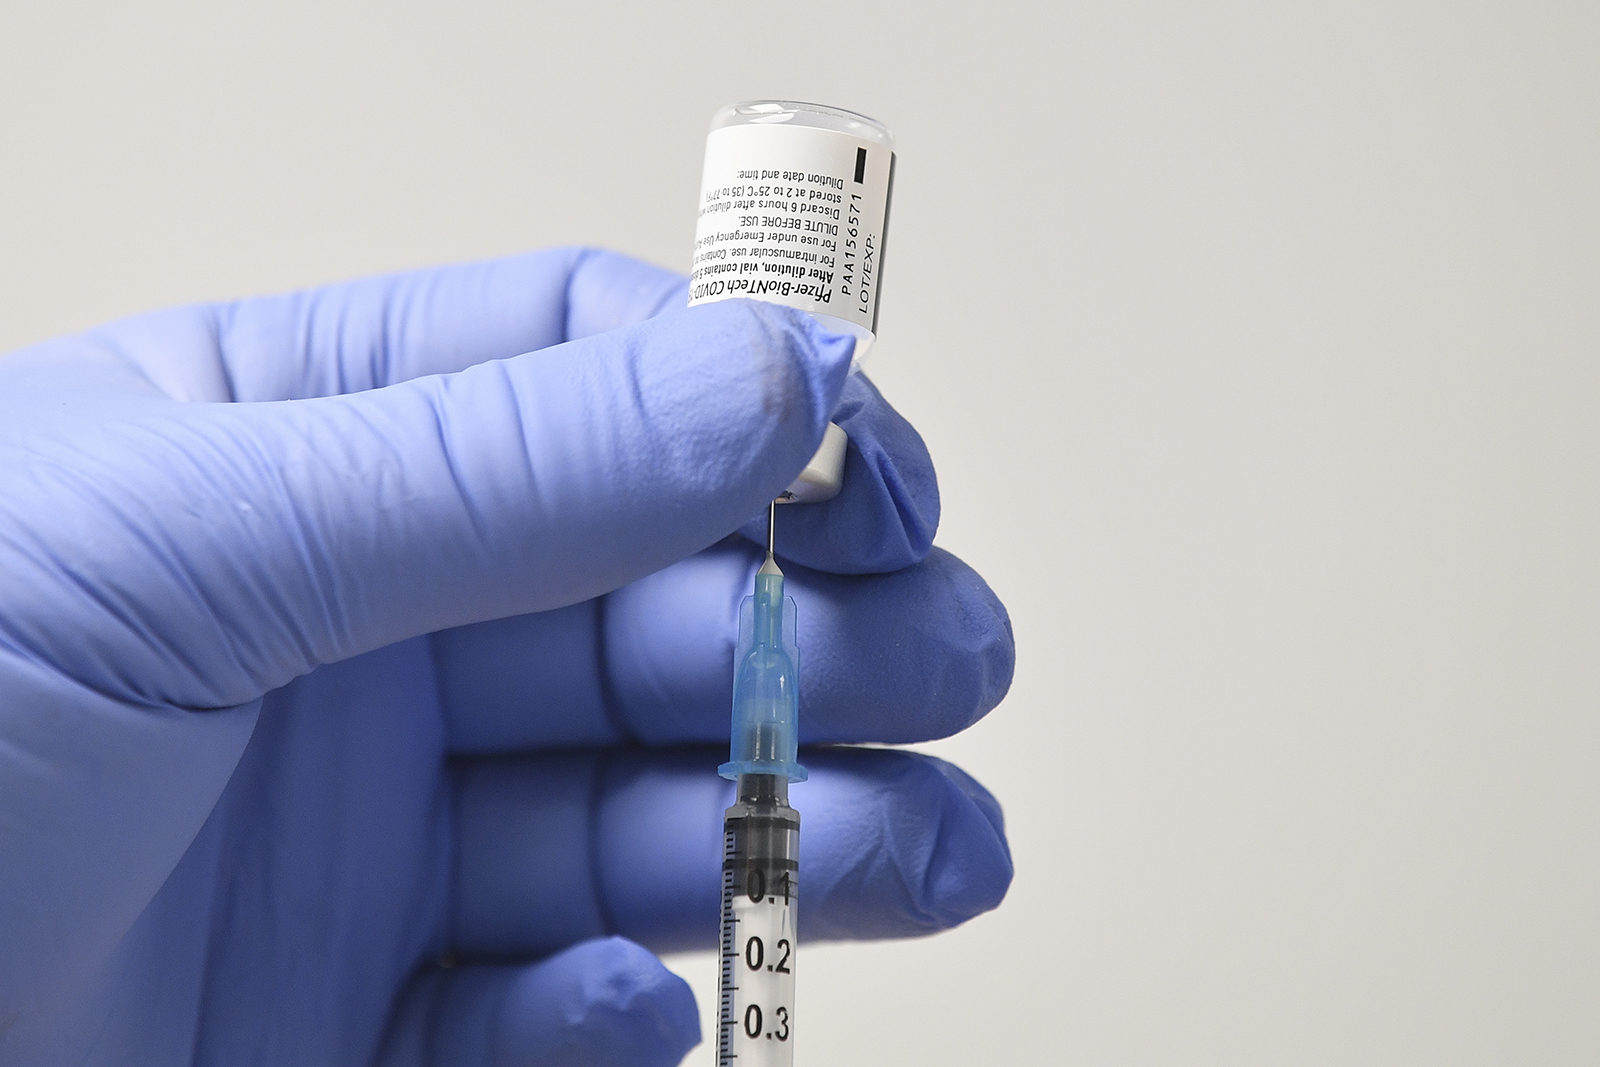 A member of staff uses a needle and a vial of Pfizer-BioNTech Covid-19 vaccine to prepare a dose at a vaccination health center on December 8, in Cardiff, UK.